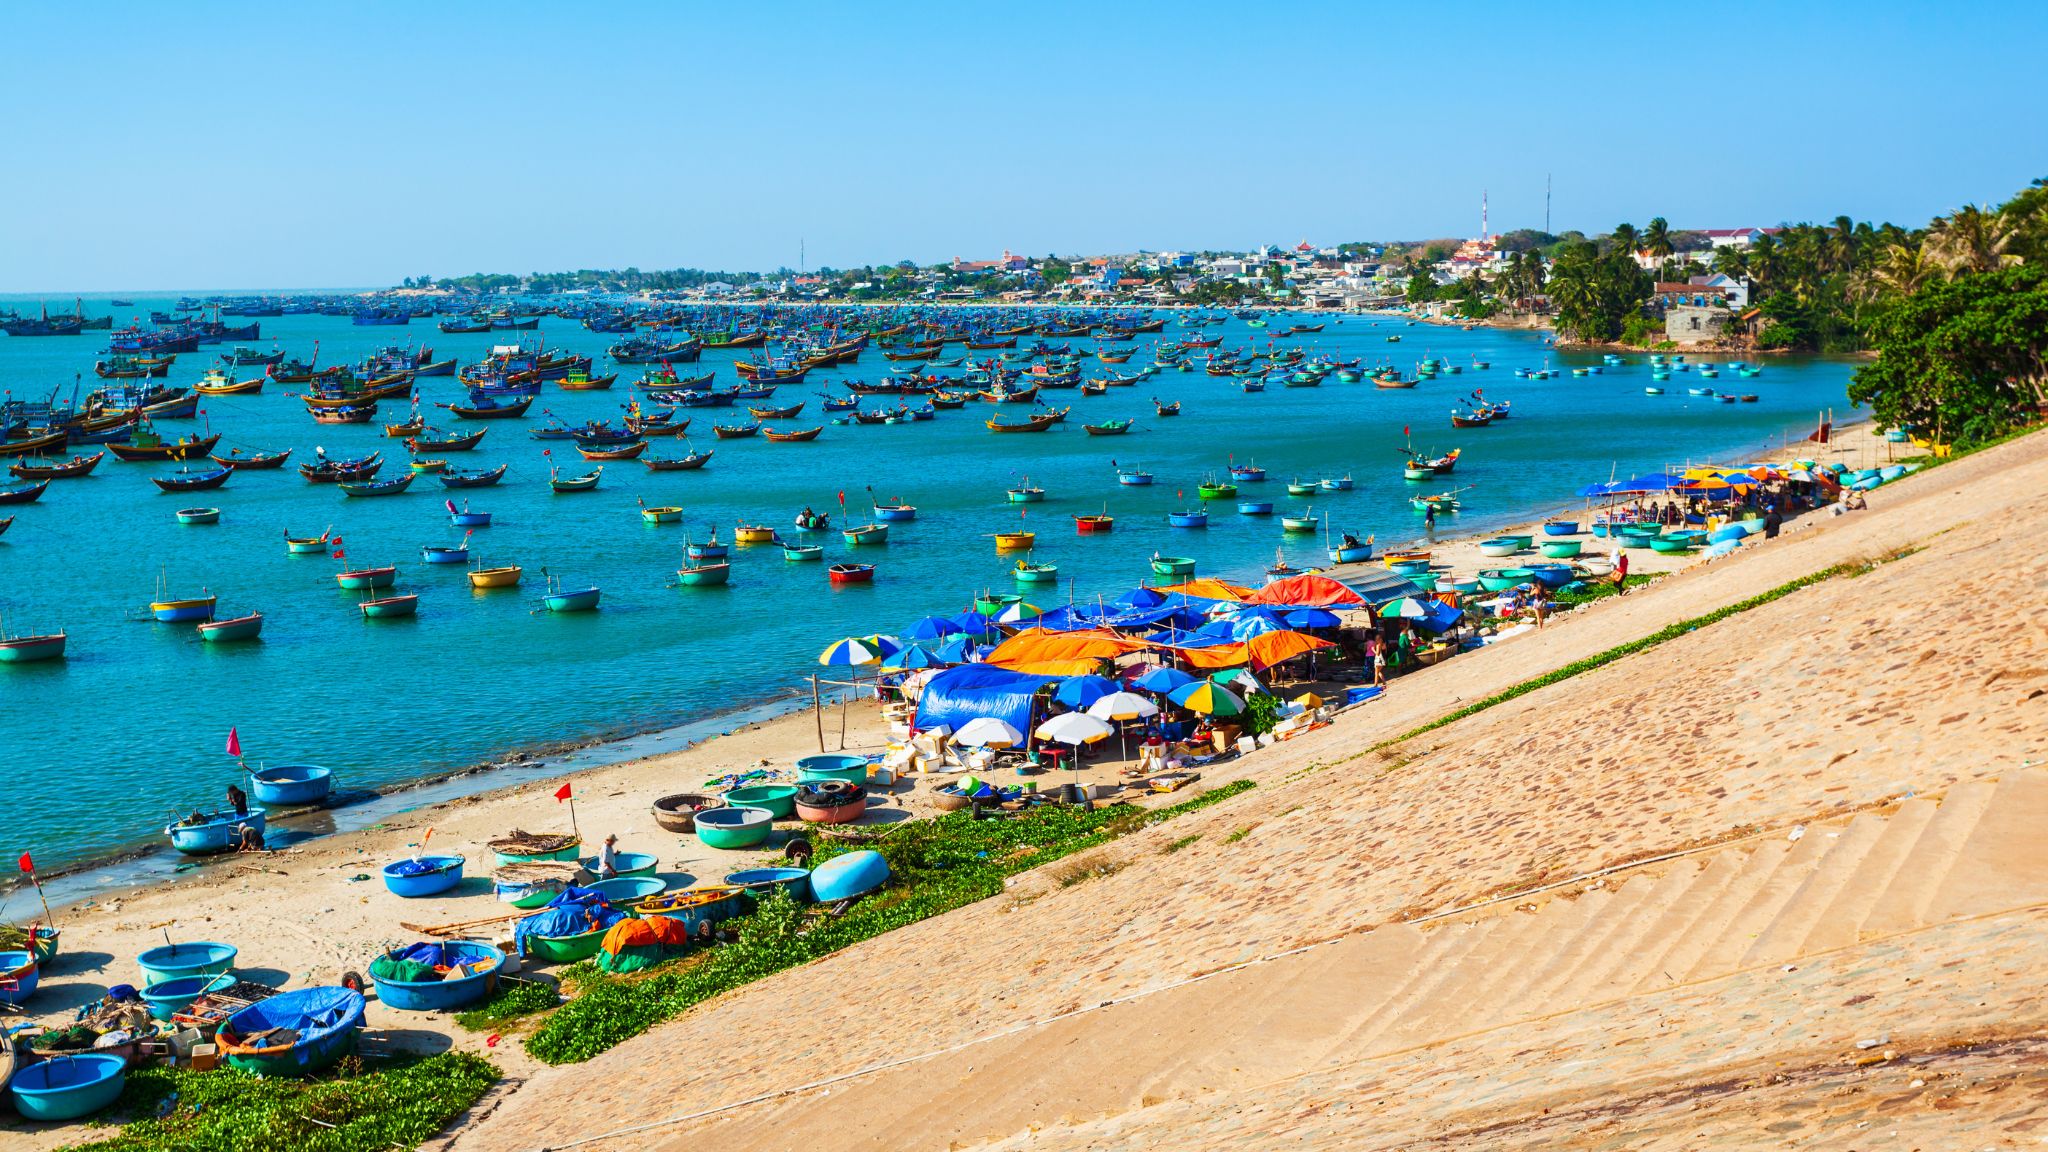 Day 6 Feel Free To Unwind In The Beautiful Scenery Of Phan Thiet